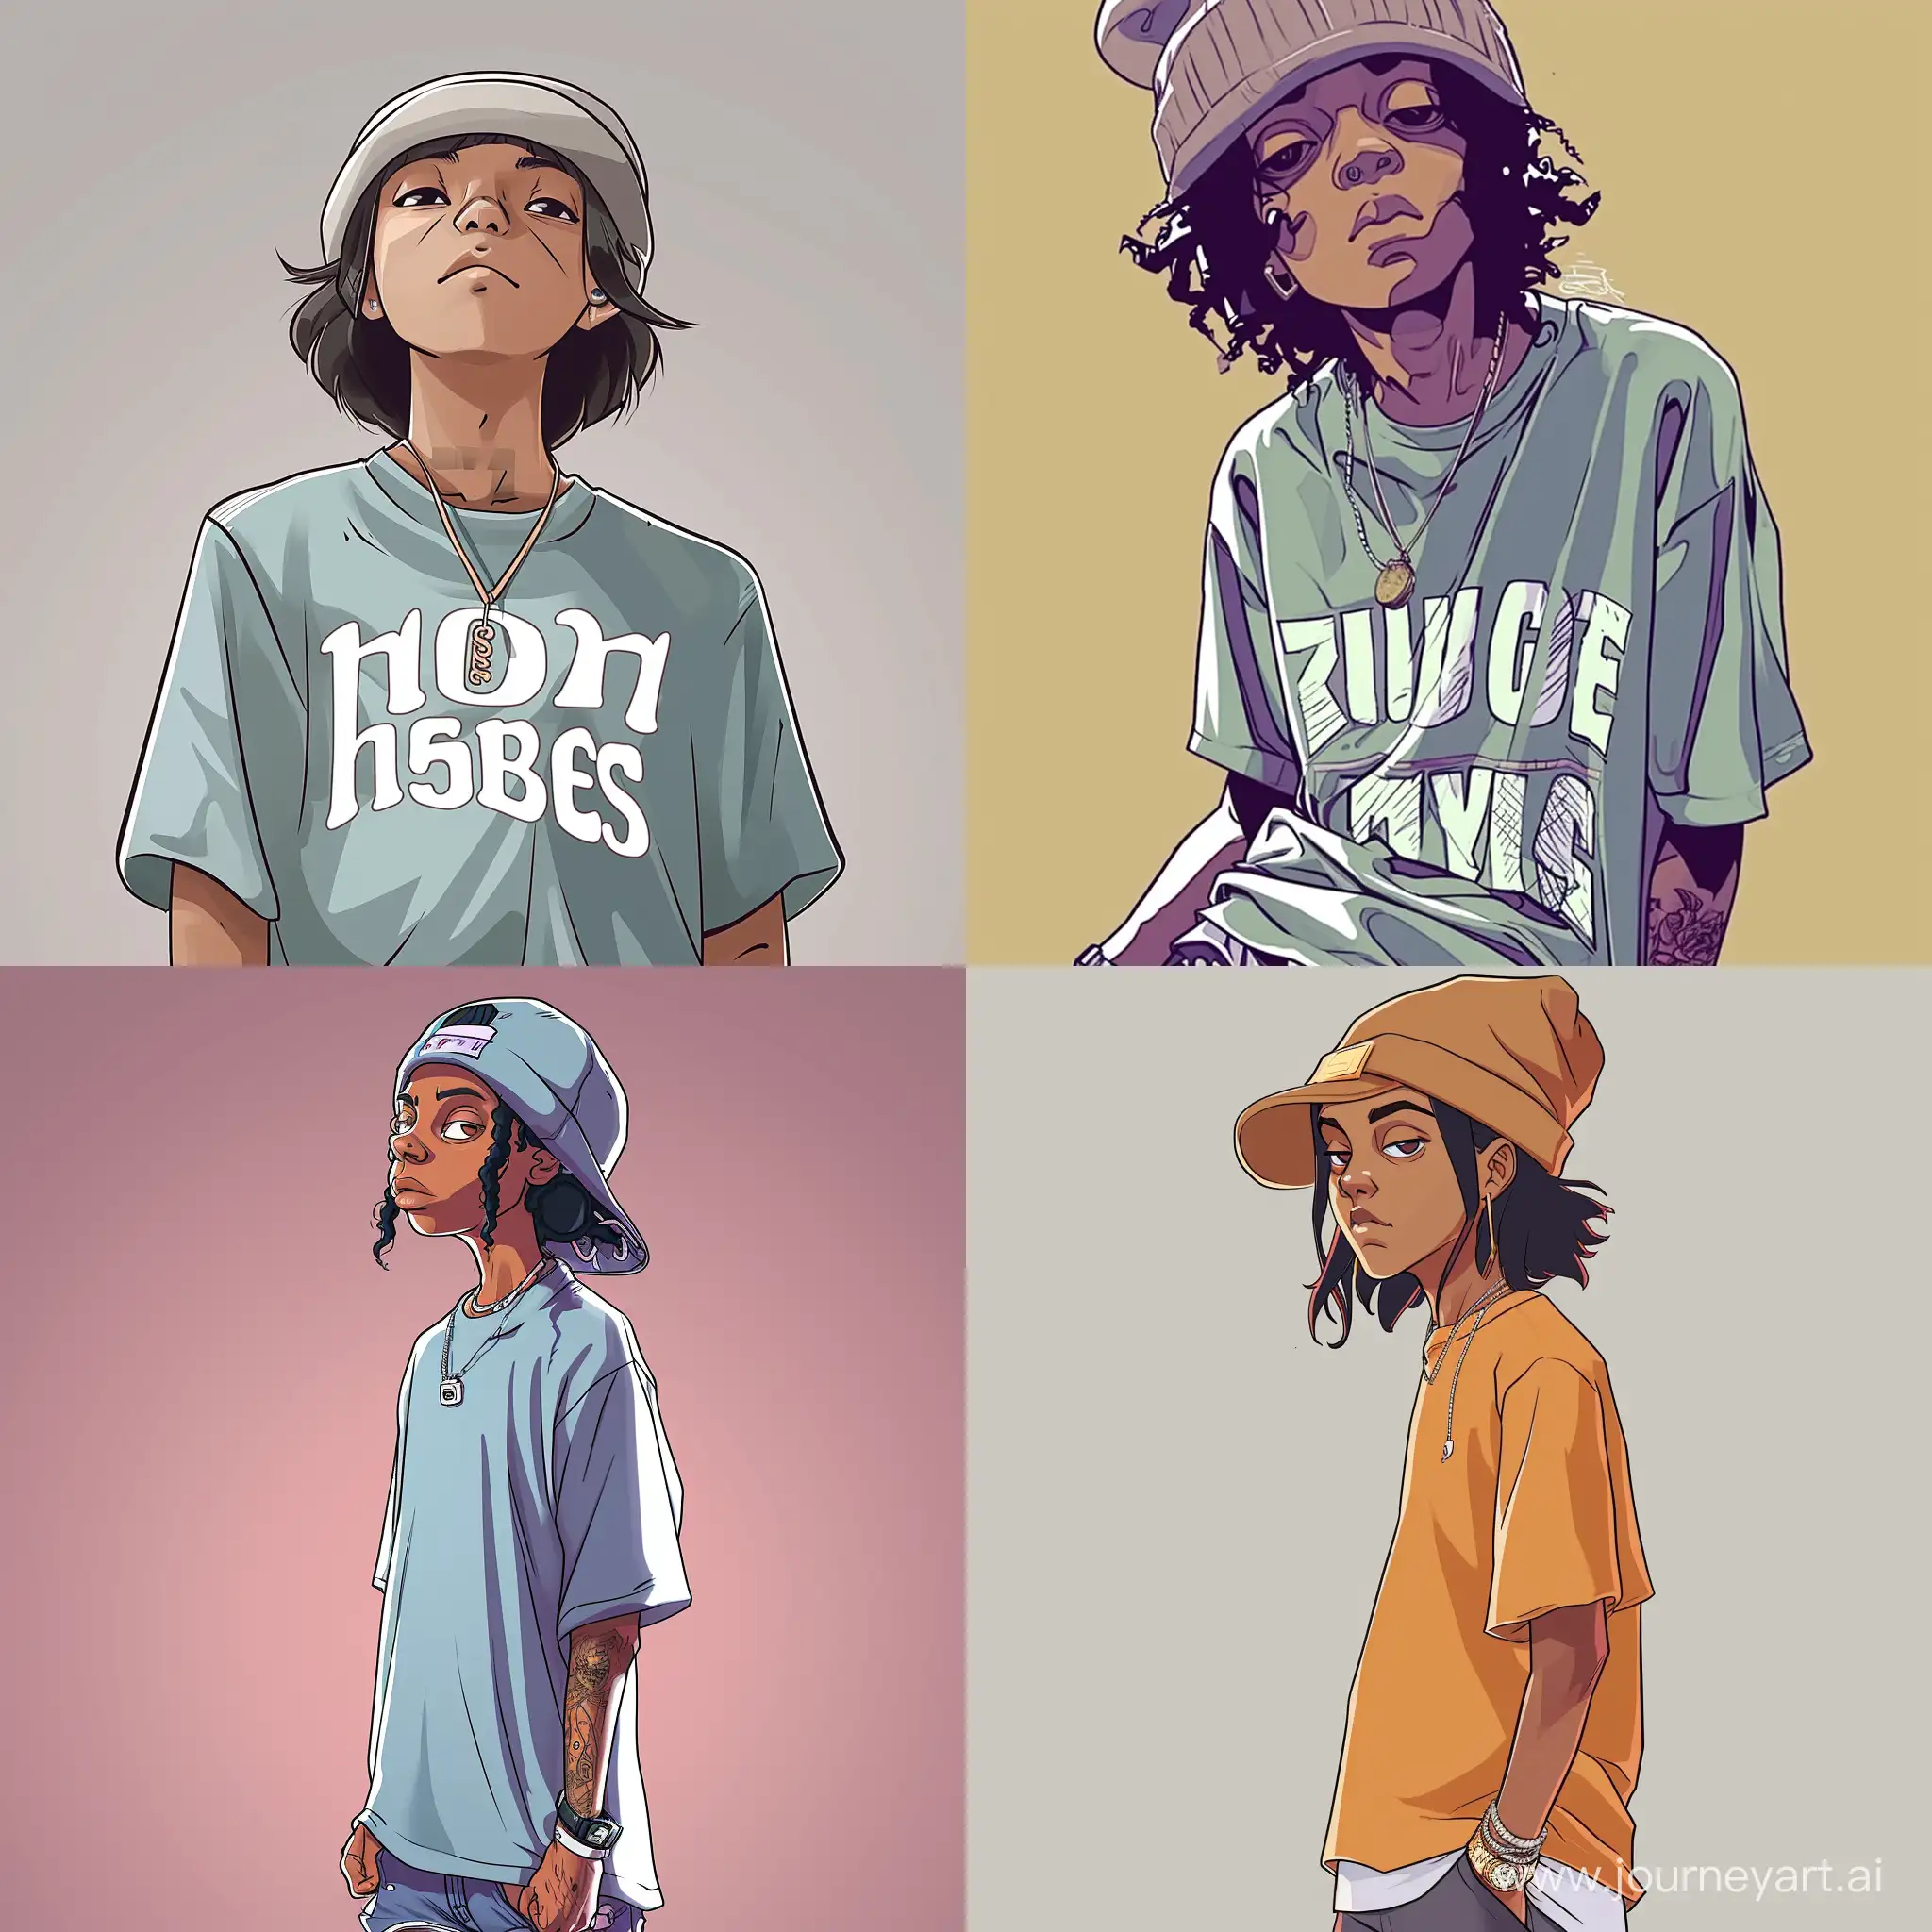 Cool-HipHop-Cartoon-Character-in-Dope-Style-with-Anime-Influence